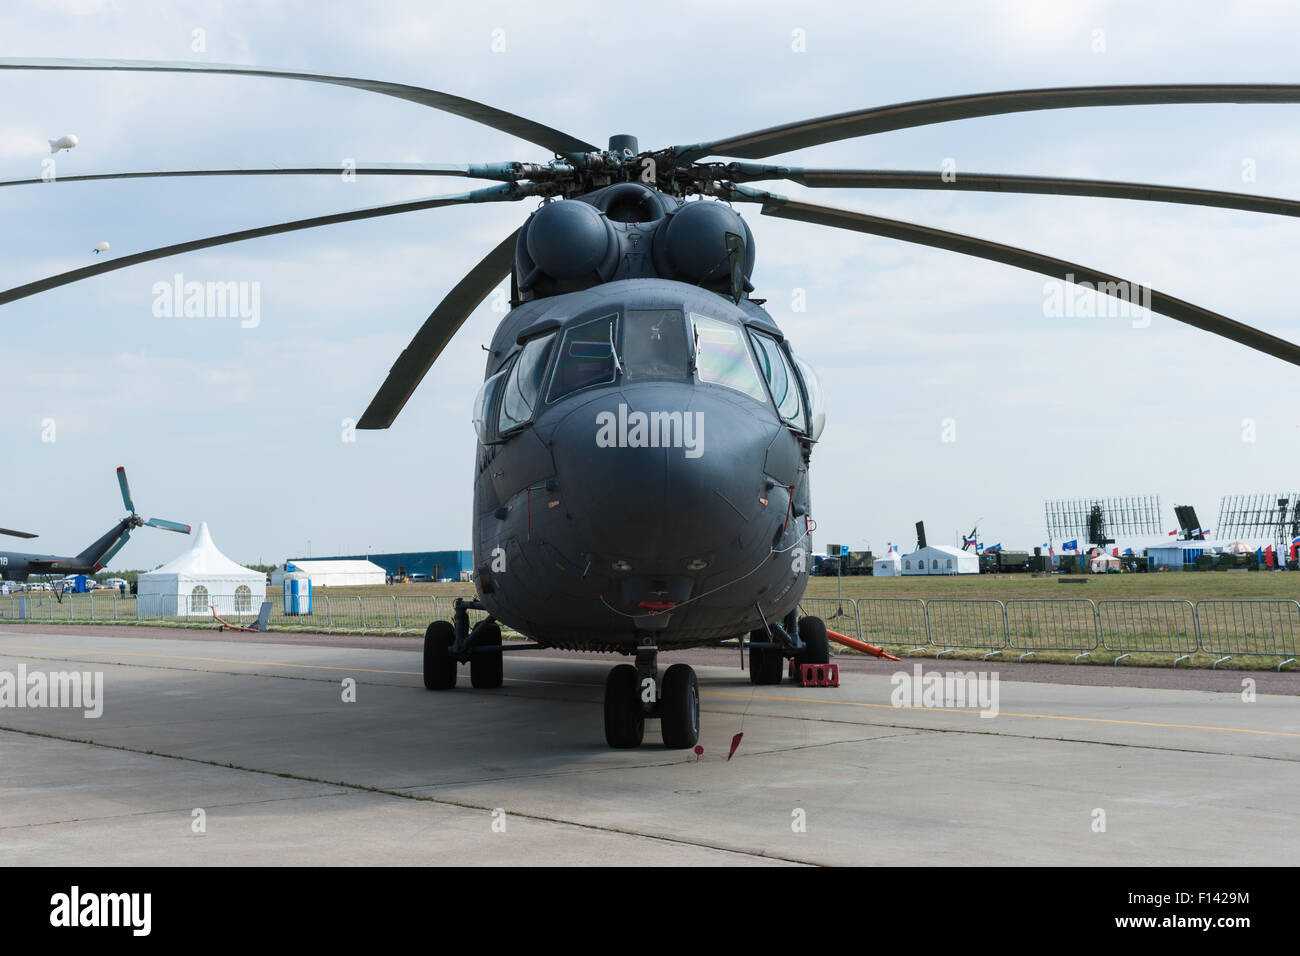 Moscow, Russia, Wednesday, August 26, 2015. The Twelfth International Moscow Aerospace Show MAKS 2015 was opened in Zhukovsky city in the Moscow Region on August 25, 2015. The aim of the show is to demonstrate Russian aerospace achievements, make contracts and negotiate international projects. Mil Mi-26 (Halo) heavy transport helicopter. It is used for military and civilian purposes and the largest and most powerful helicopter in mass production. Credit:  Alex's Pictures/Alamy Live News Stock Photo